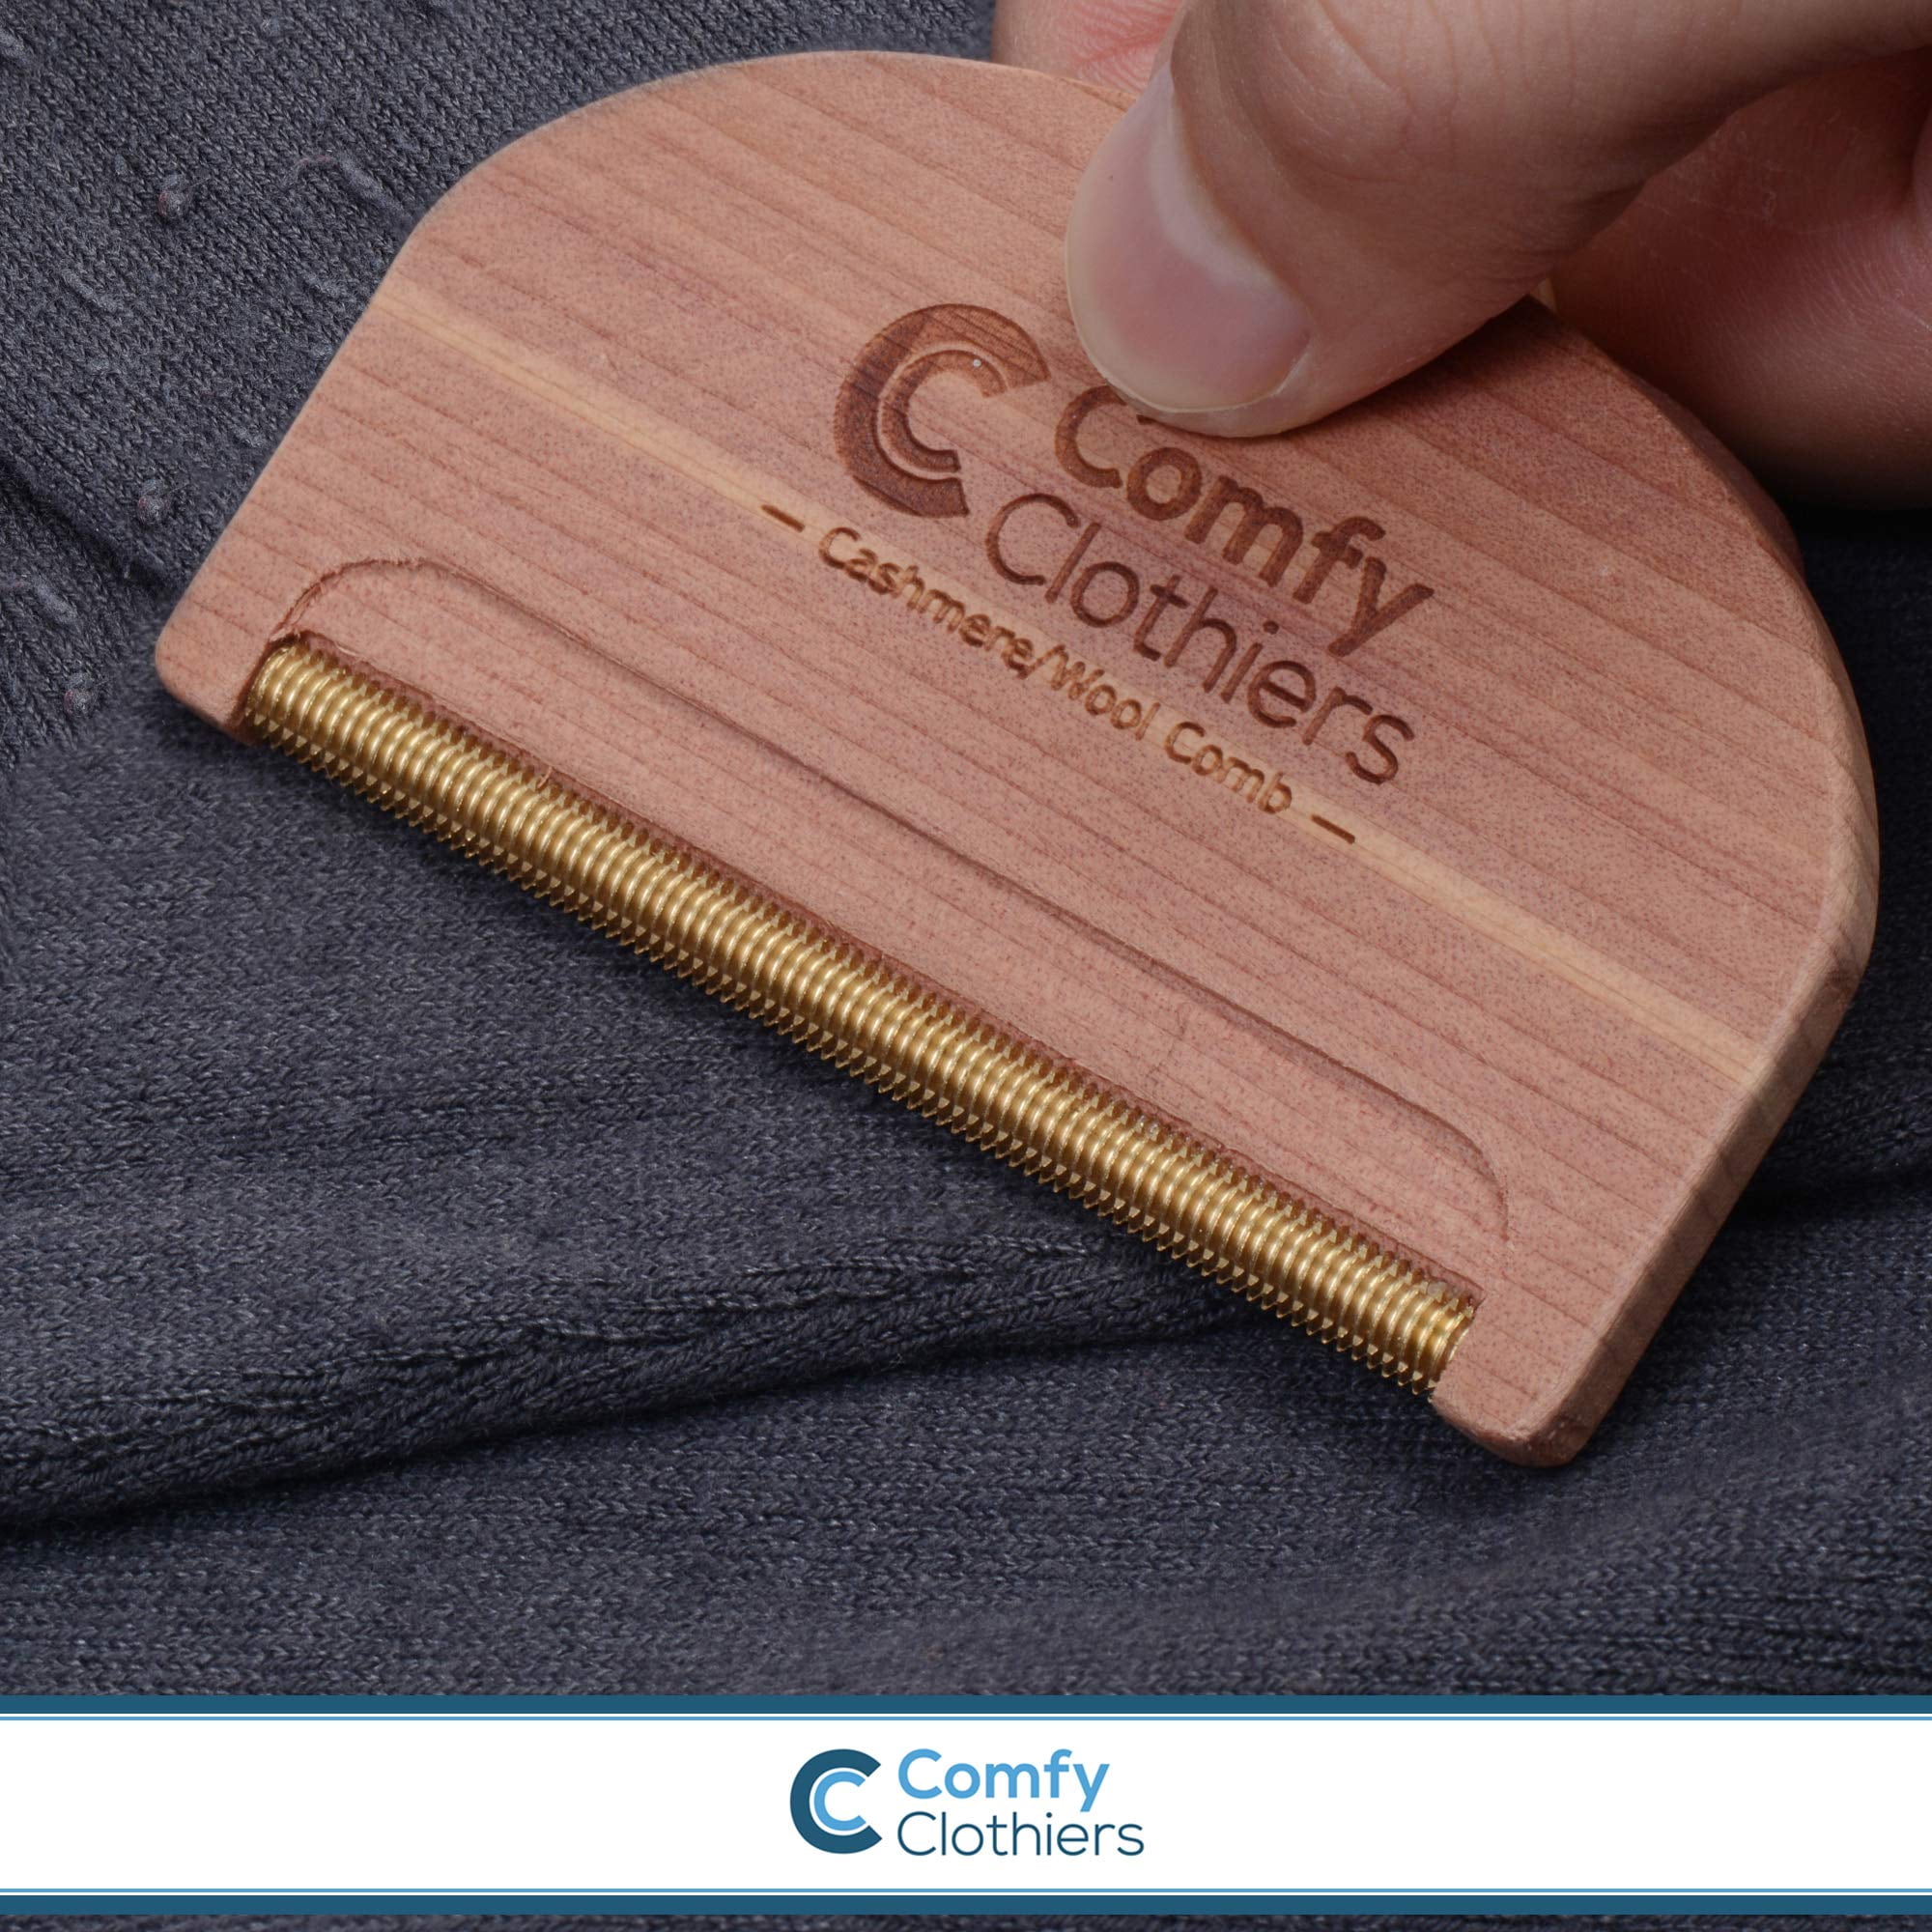 Cedar wood cashmere &fine wool comb for De-pilling sweaters&clothing  removes pills,fuzz and lint from Garments